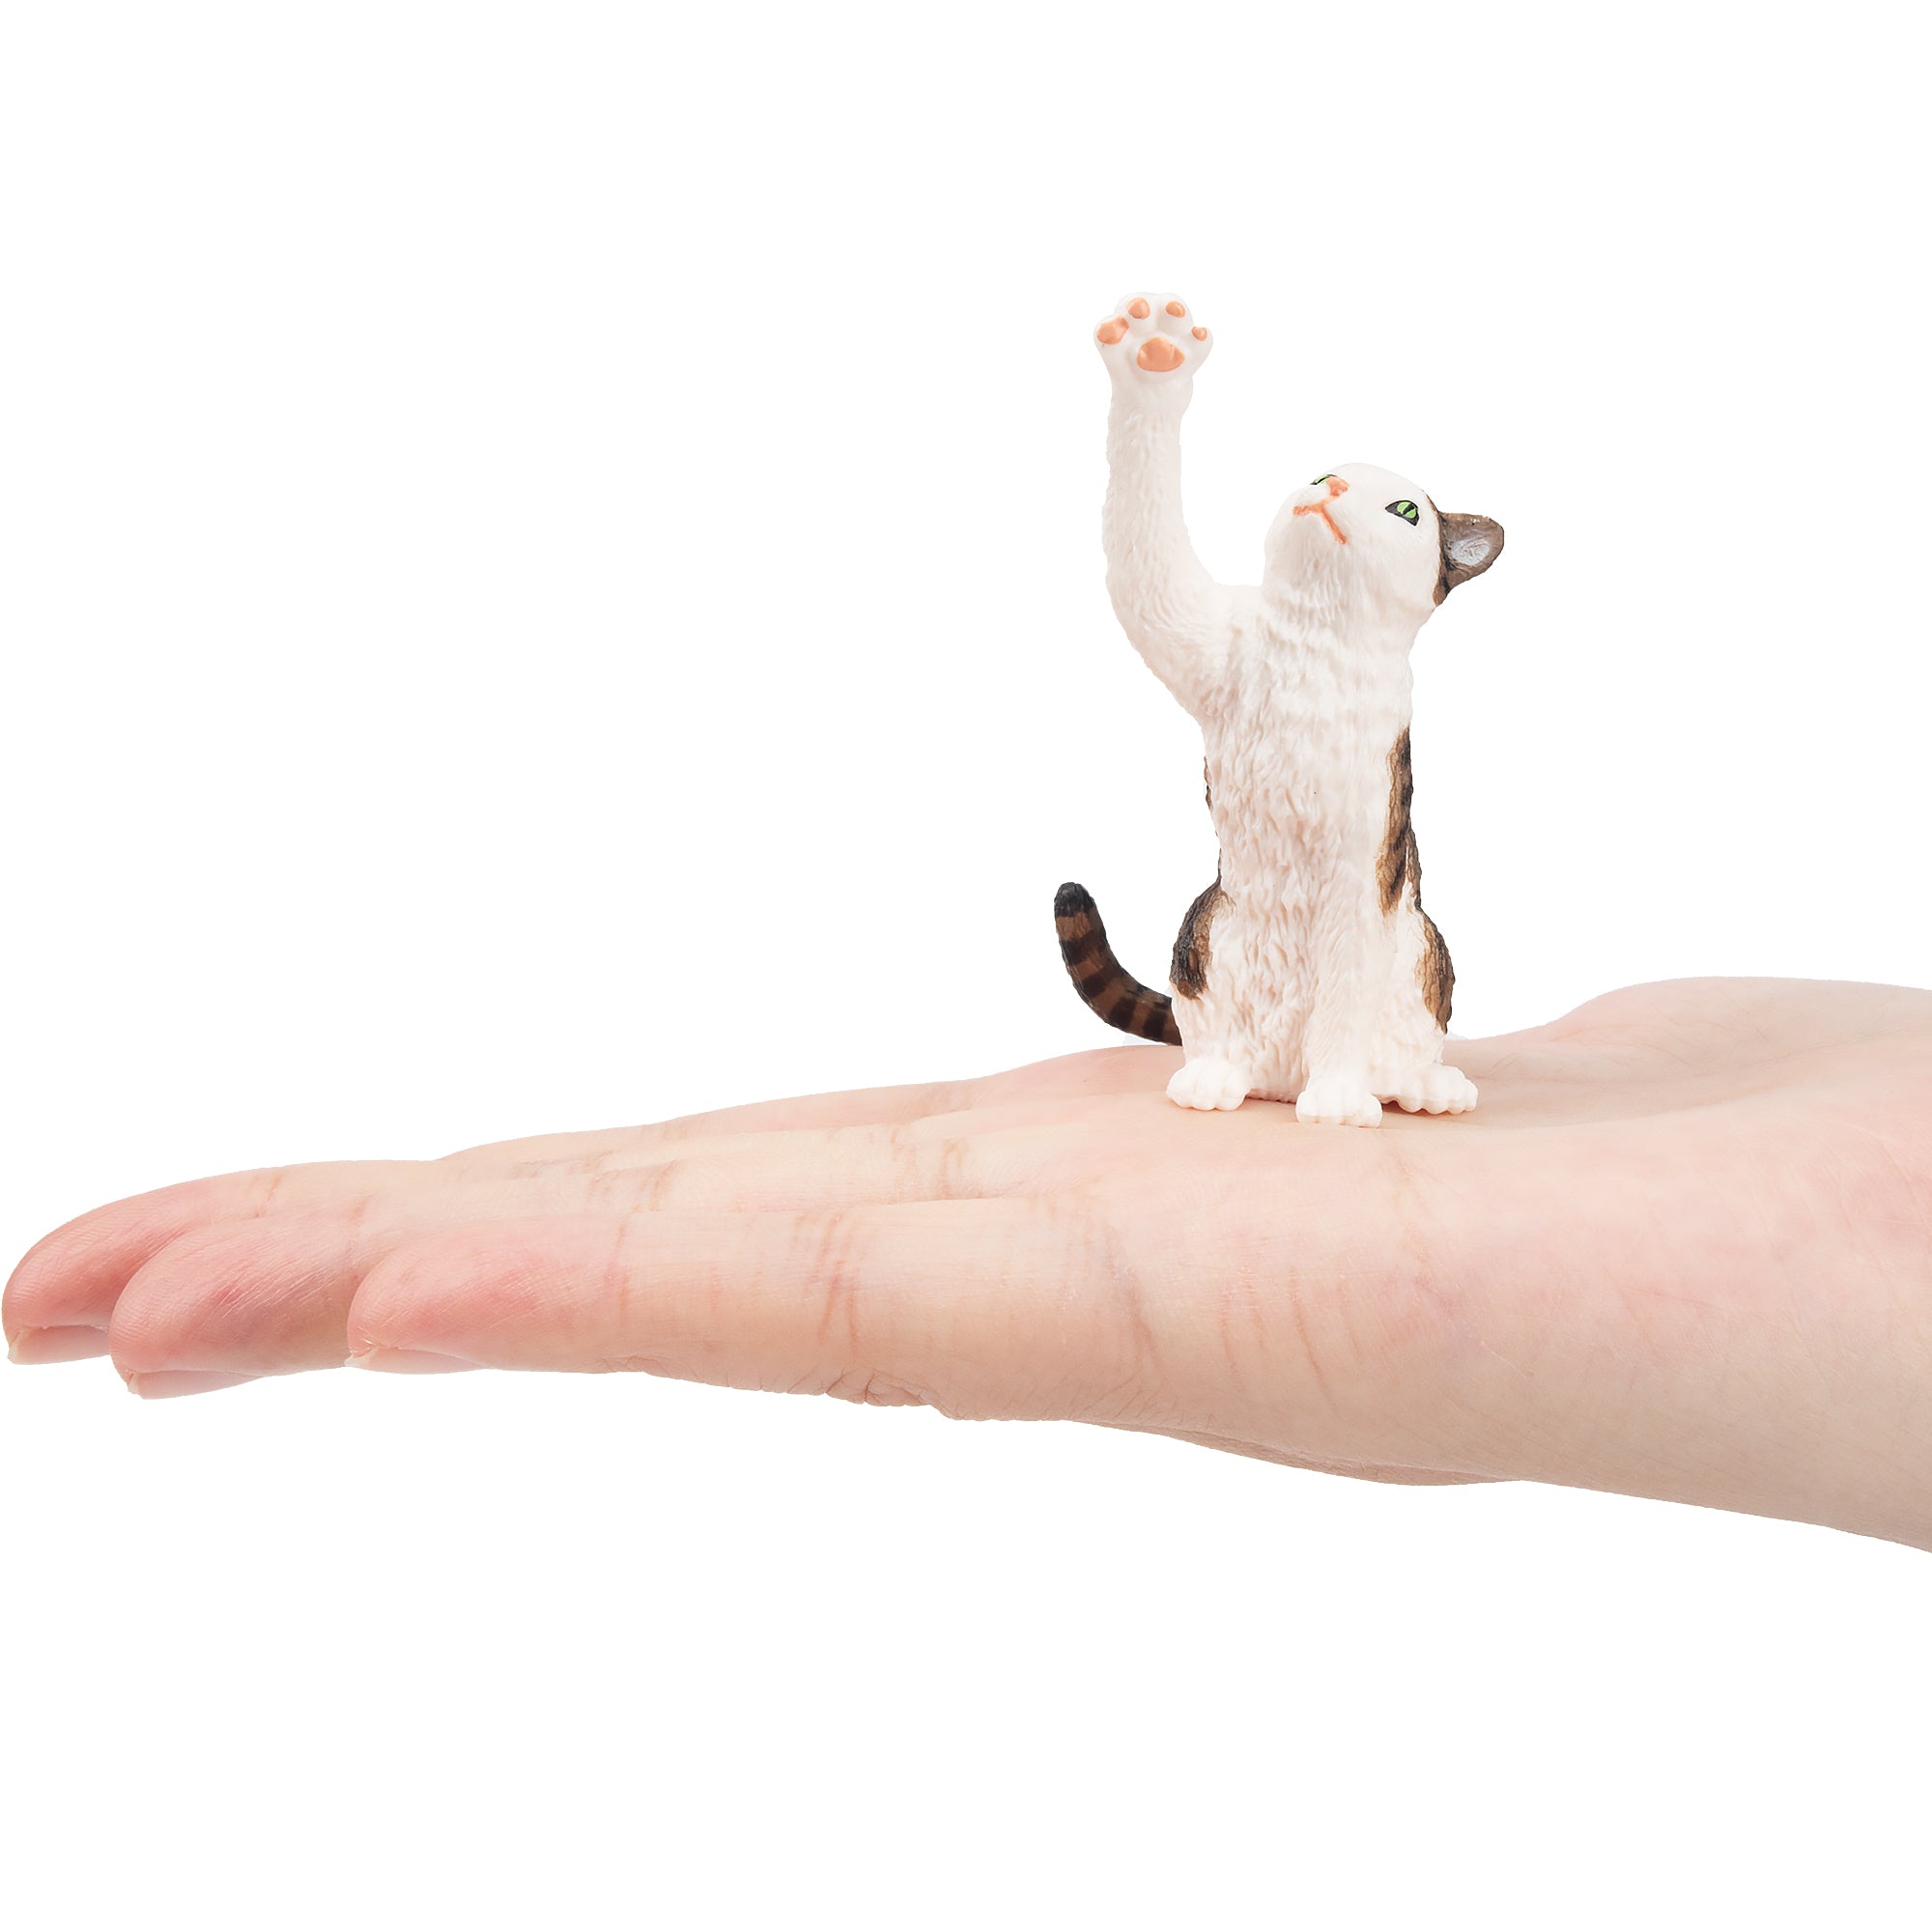 Toymany Mini Waving Tabby and White Cat Figurine Toy-on hand